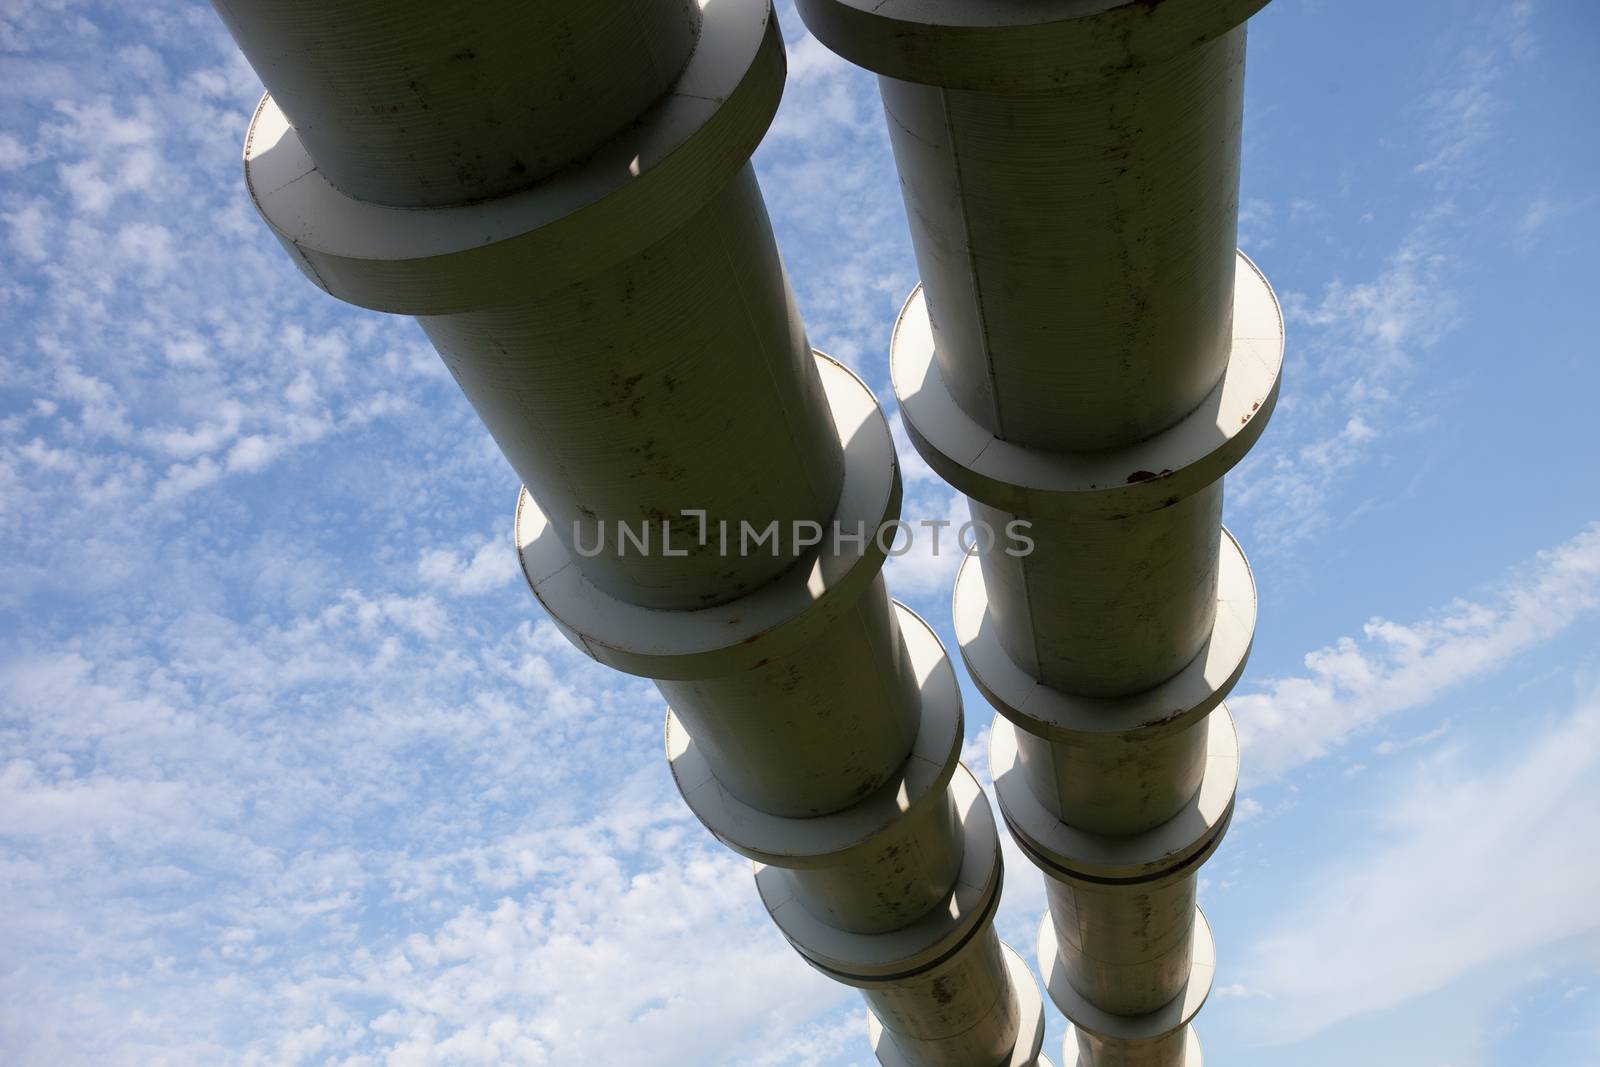 Elevated section of the pipelines against the cloudy sky